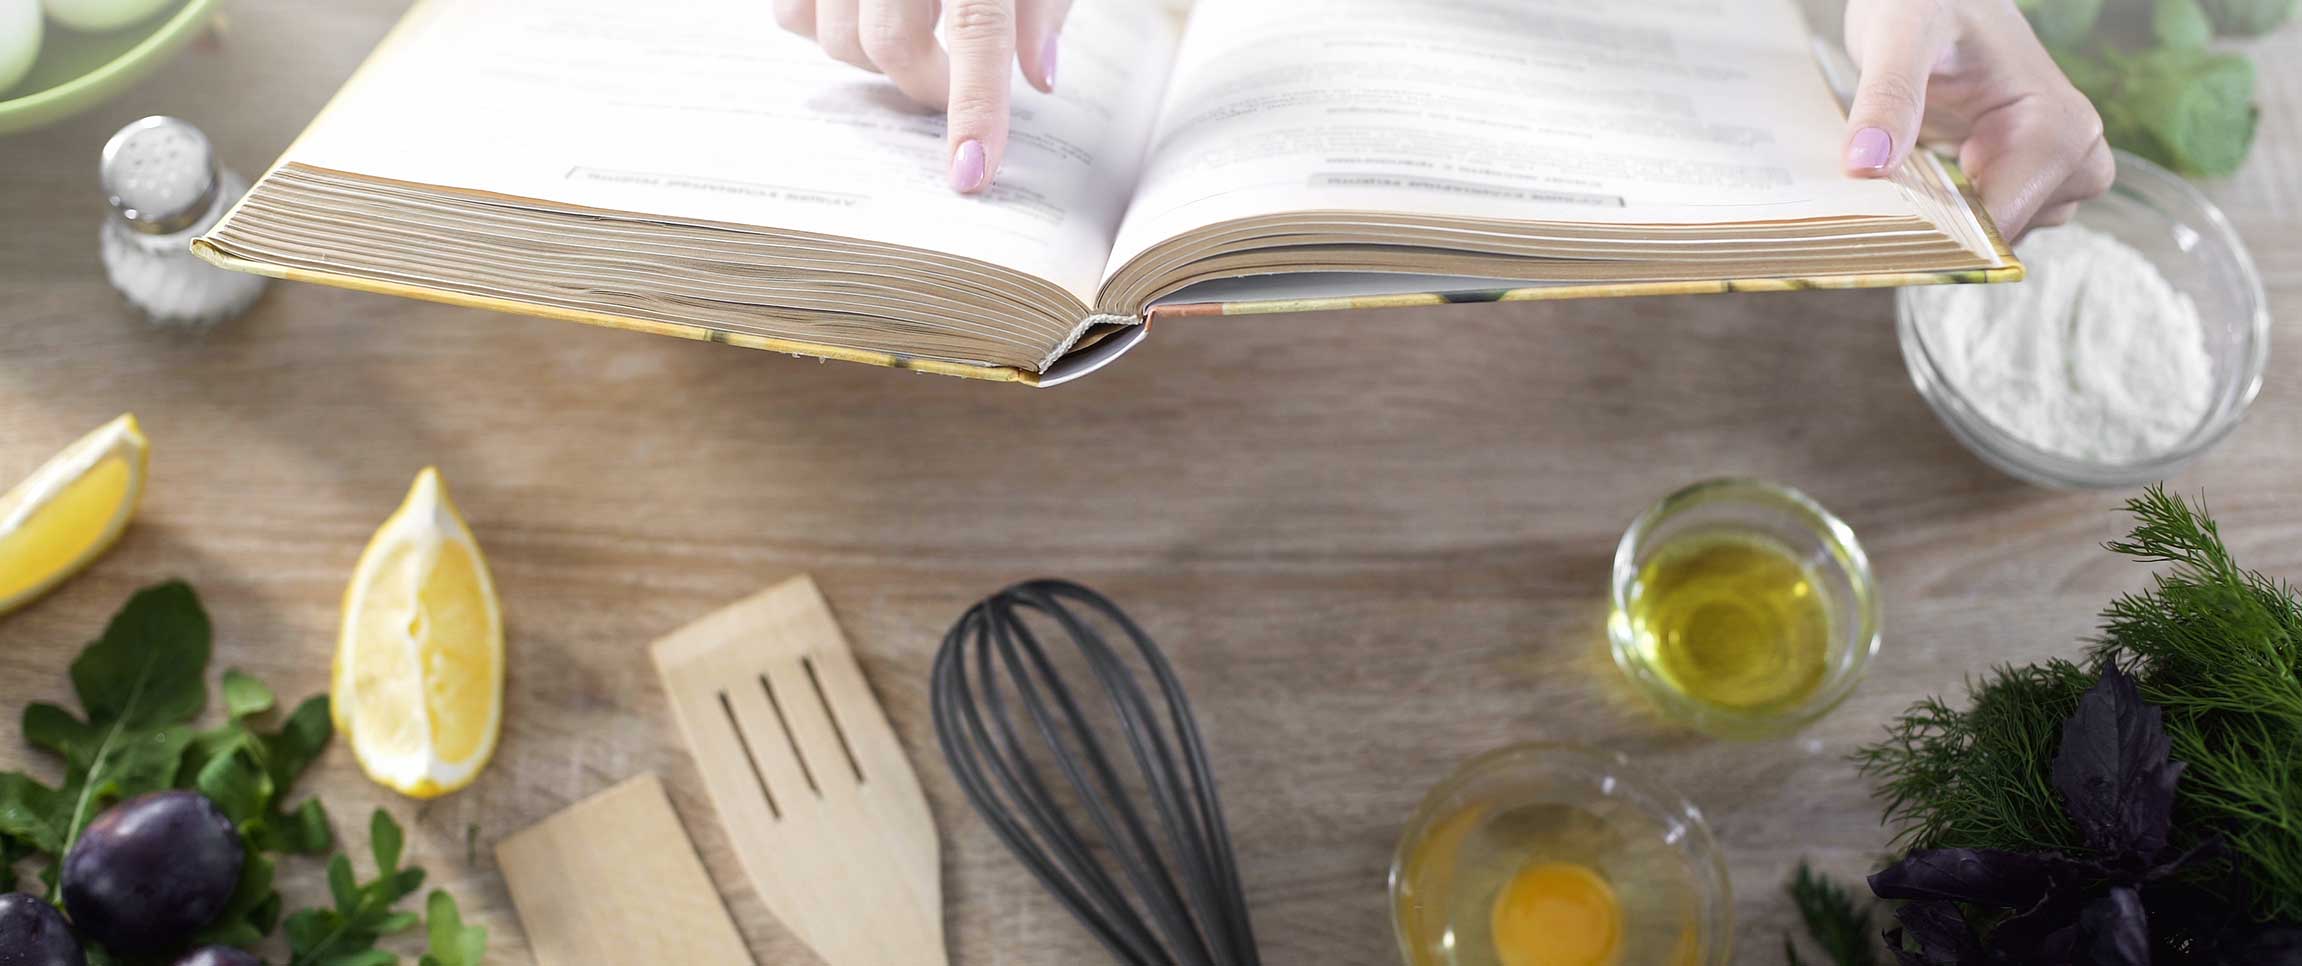 Crucial Reads for Culinary Professionals